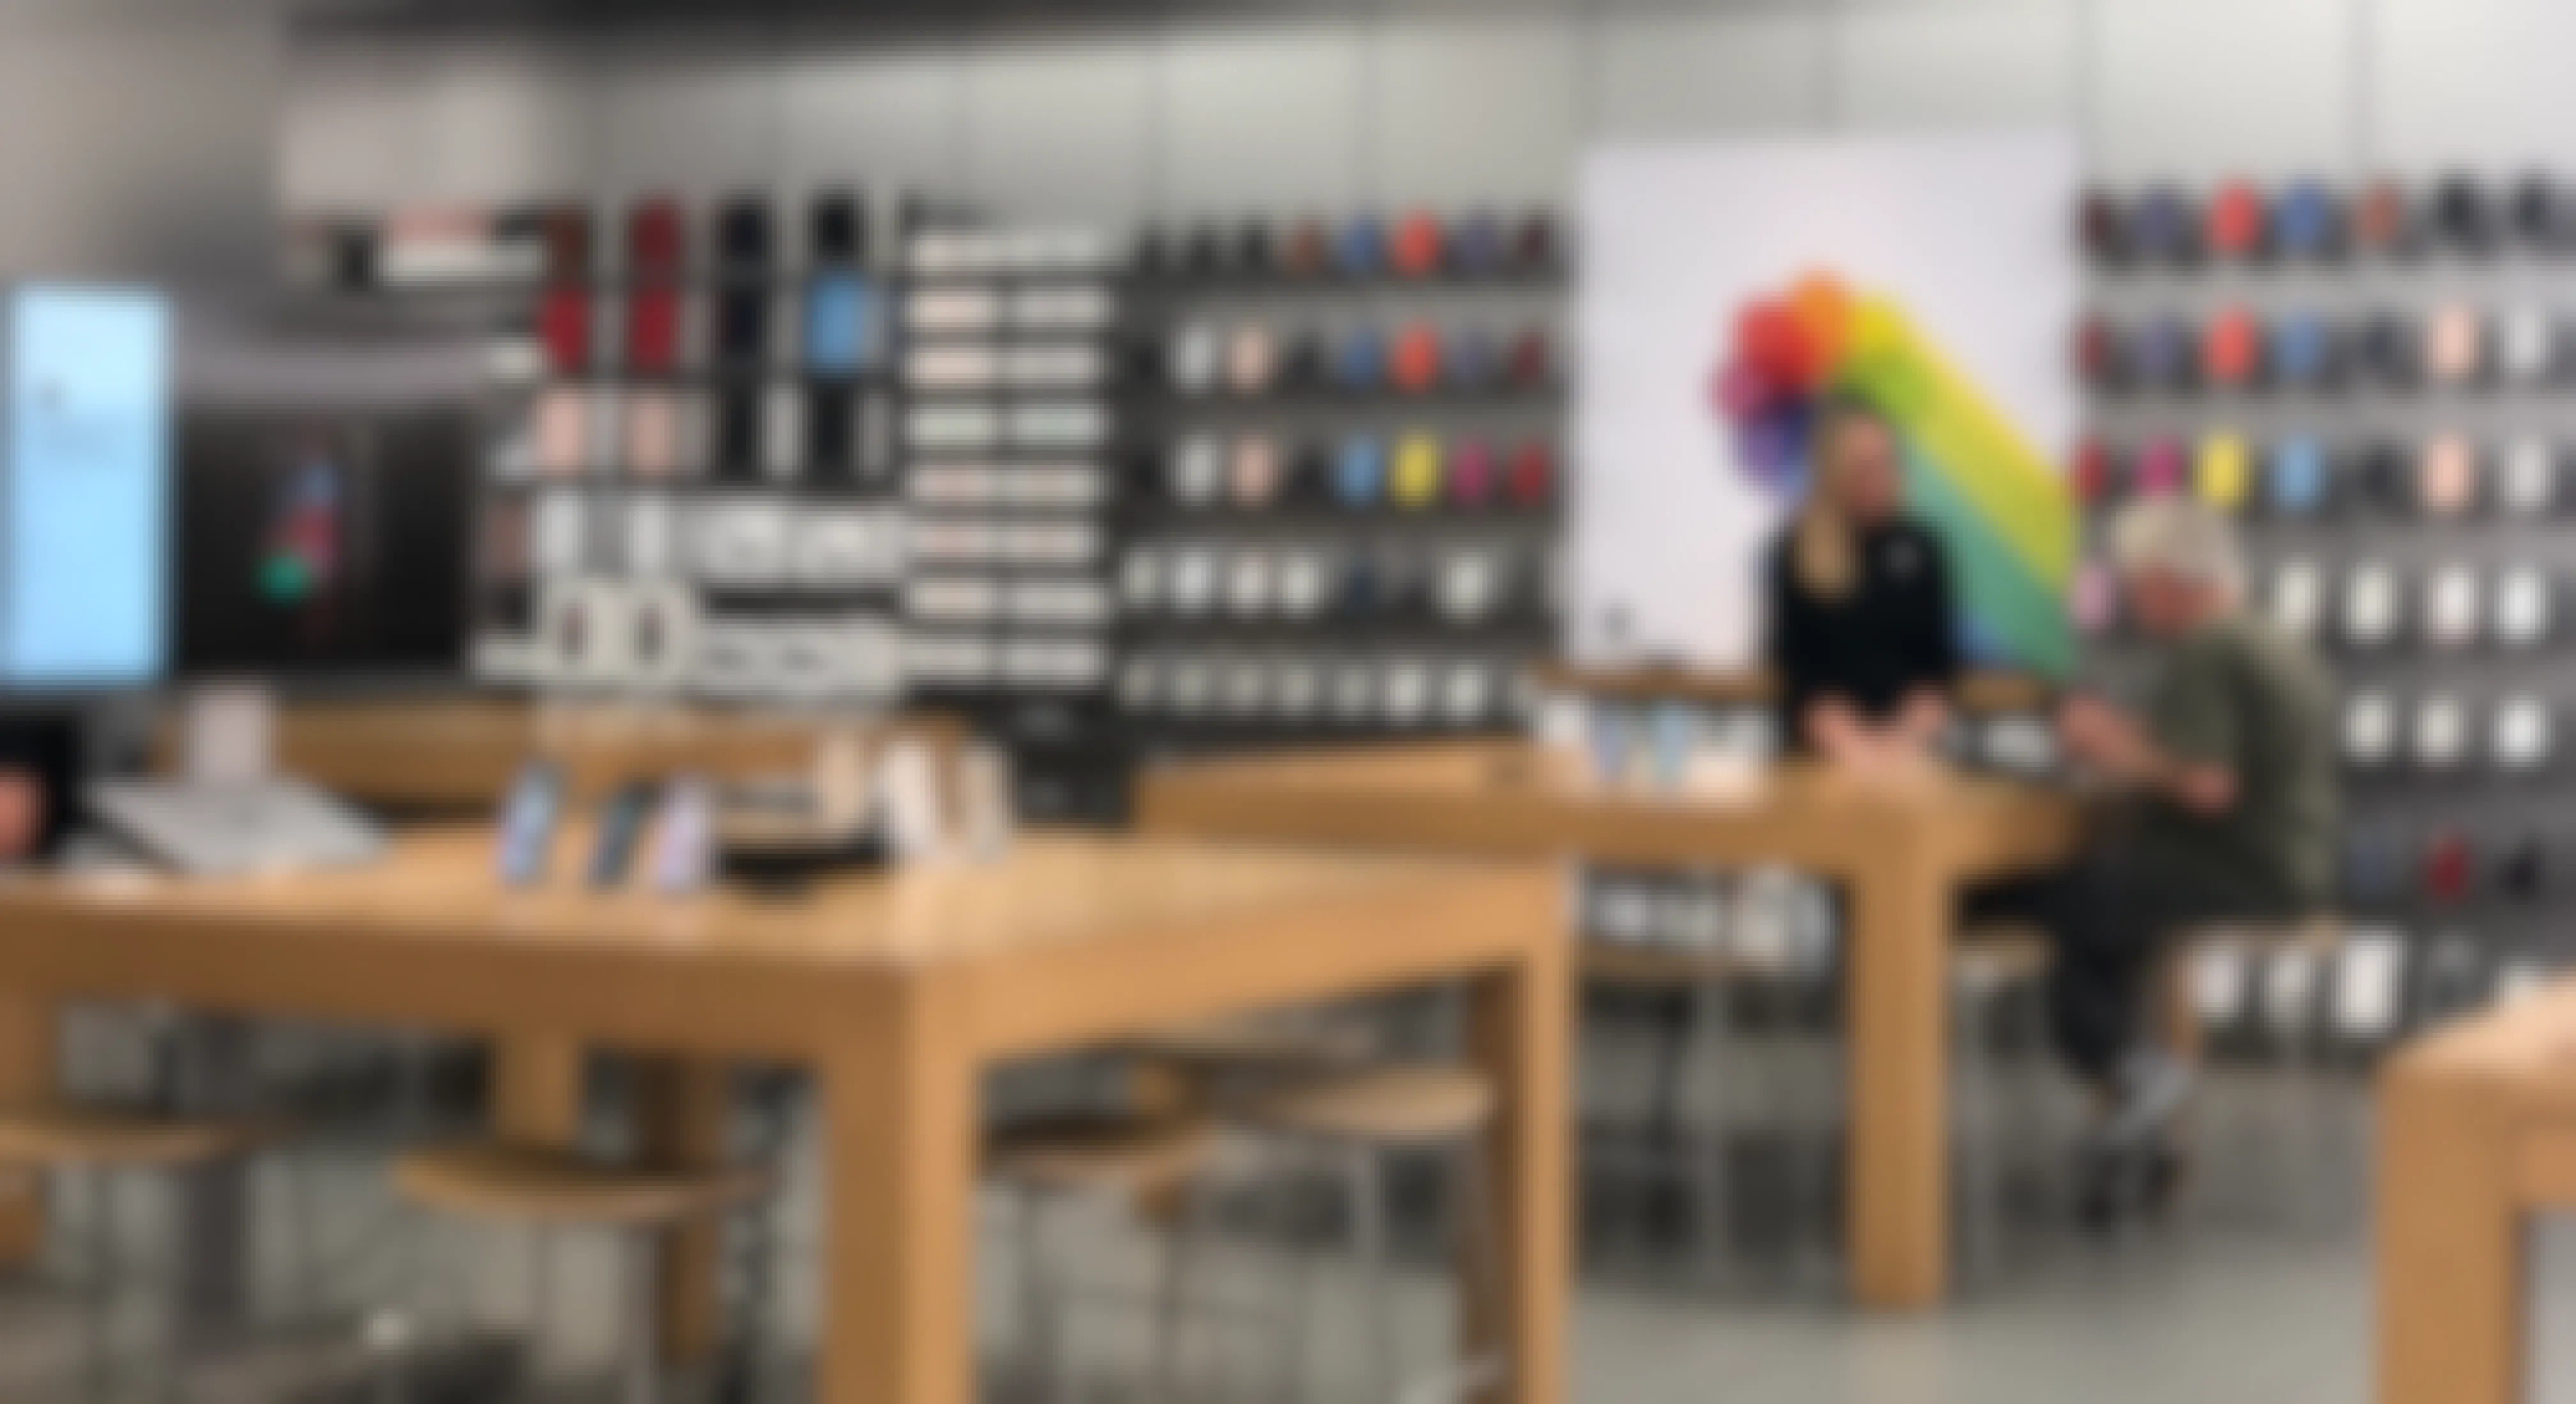 A shot of the Apple store.